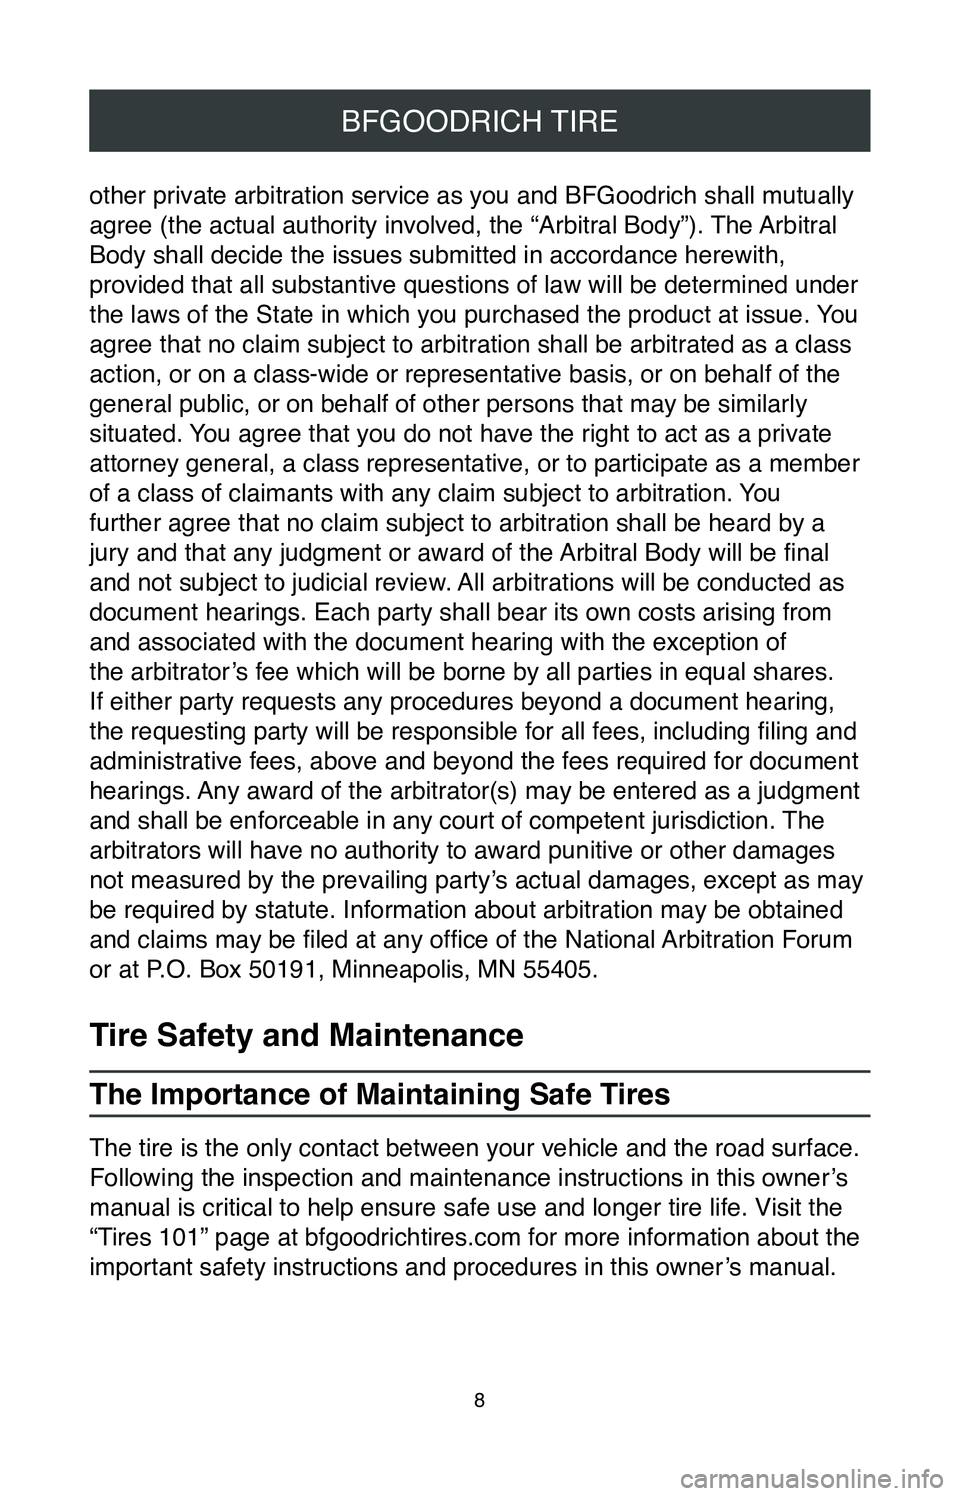 TOYOTA HIGHLANDER 2020  Warranties & Maintenance Guides (in English) 8
BFGOODRICH TIRE
other private arbitration service as you and BFGoodrich shall mutually 
agree (the actual authority involved, the “Arbitral Body”). The Arbitral 
Body shall decide the issues sub